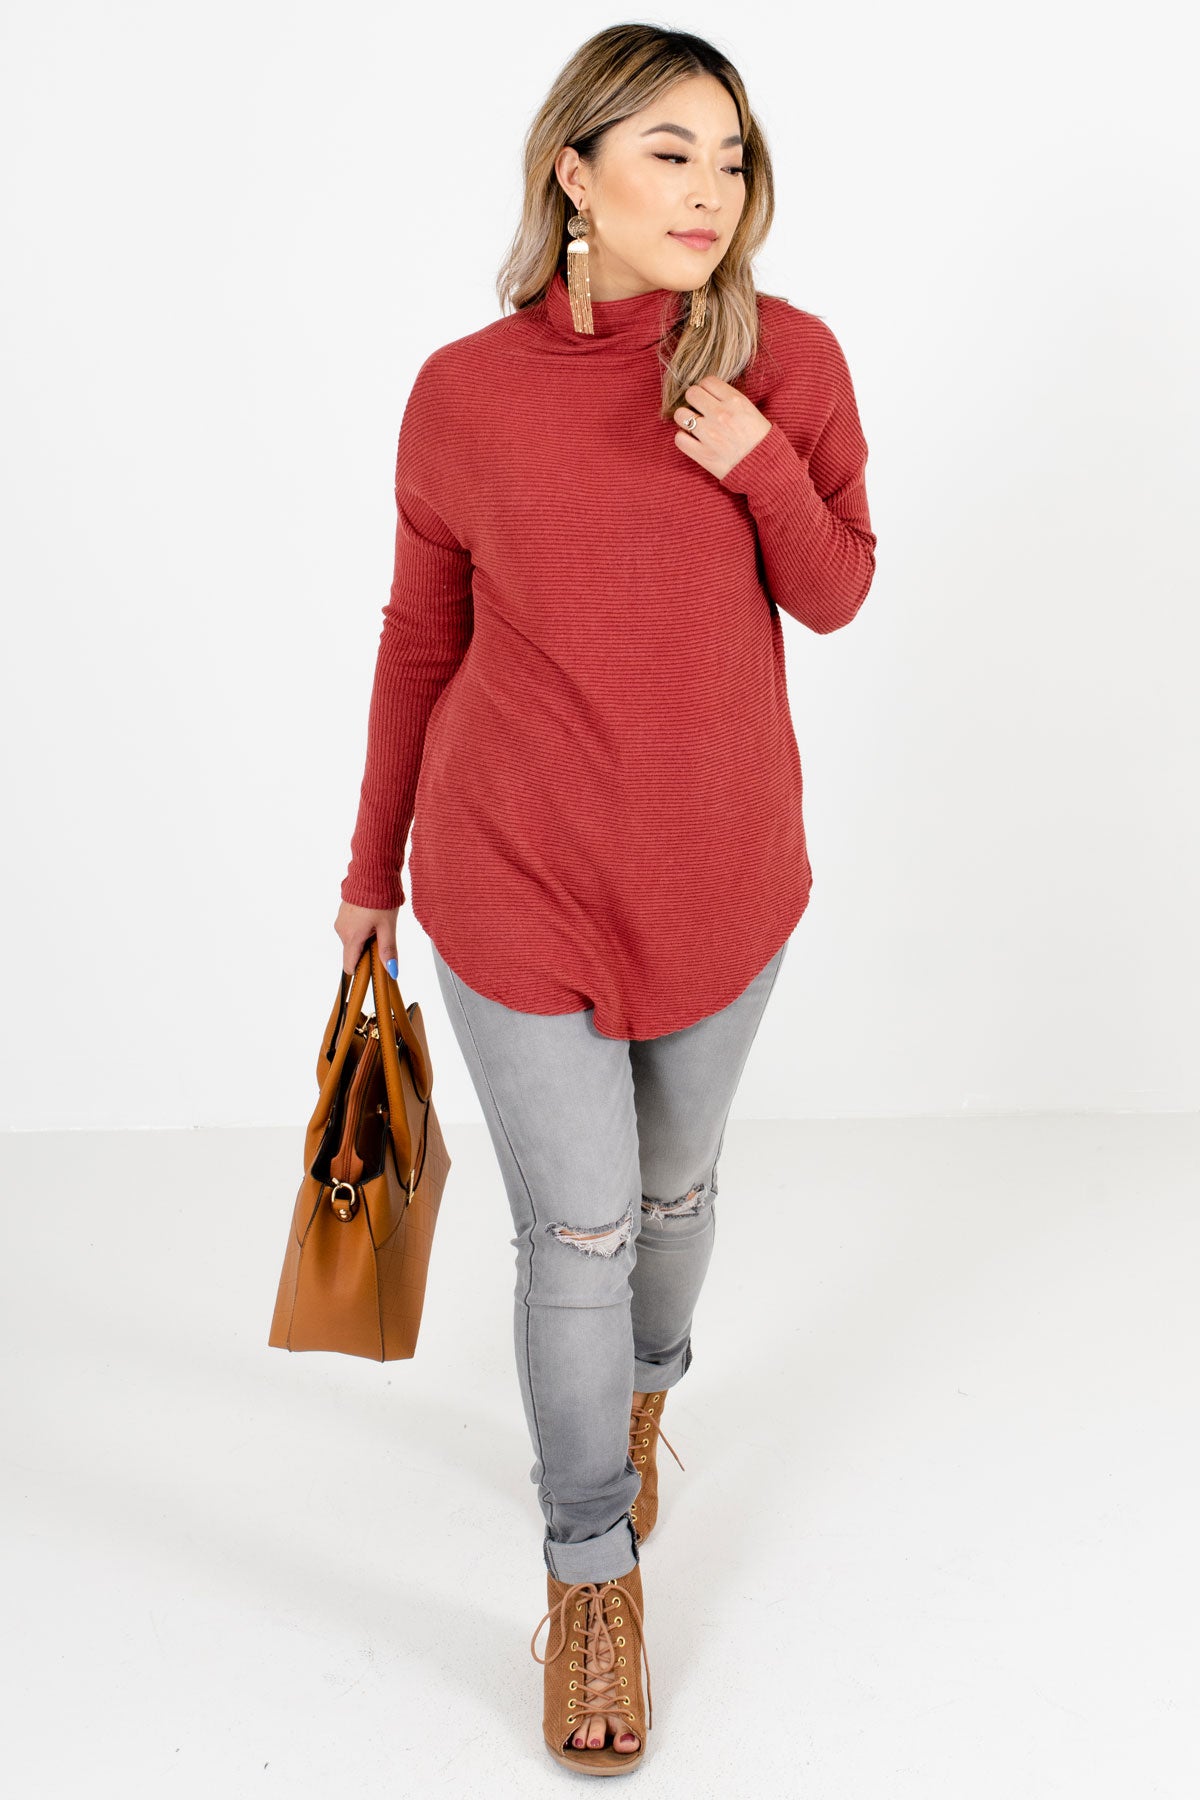 Women’s Brick Red Fall and Winter Boutique Clothing